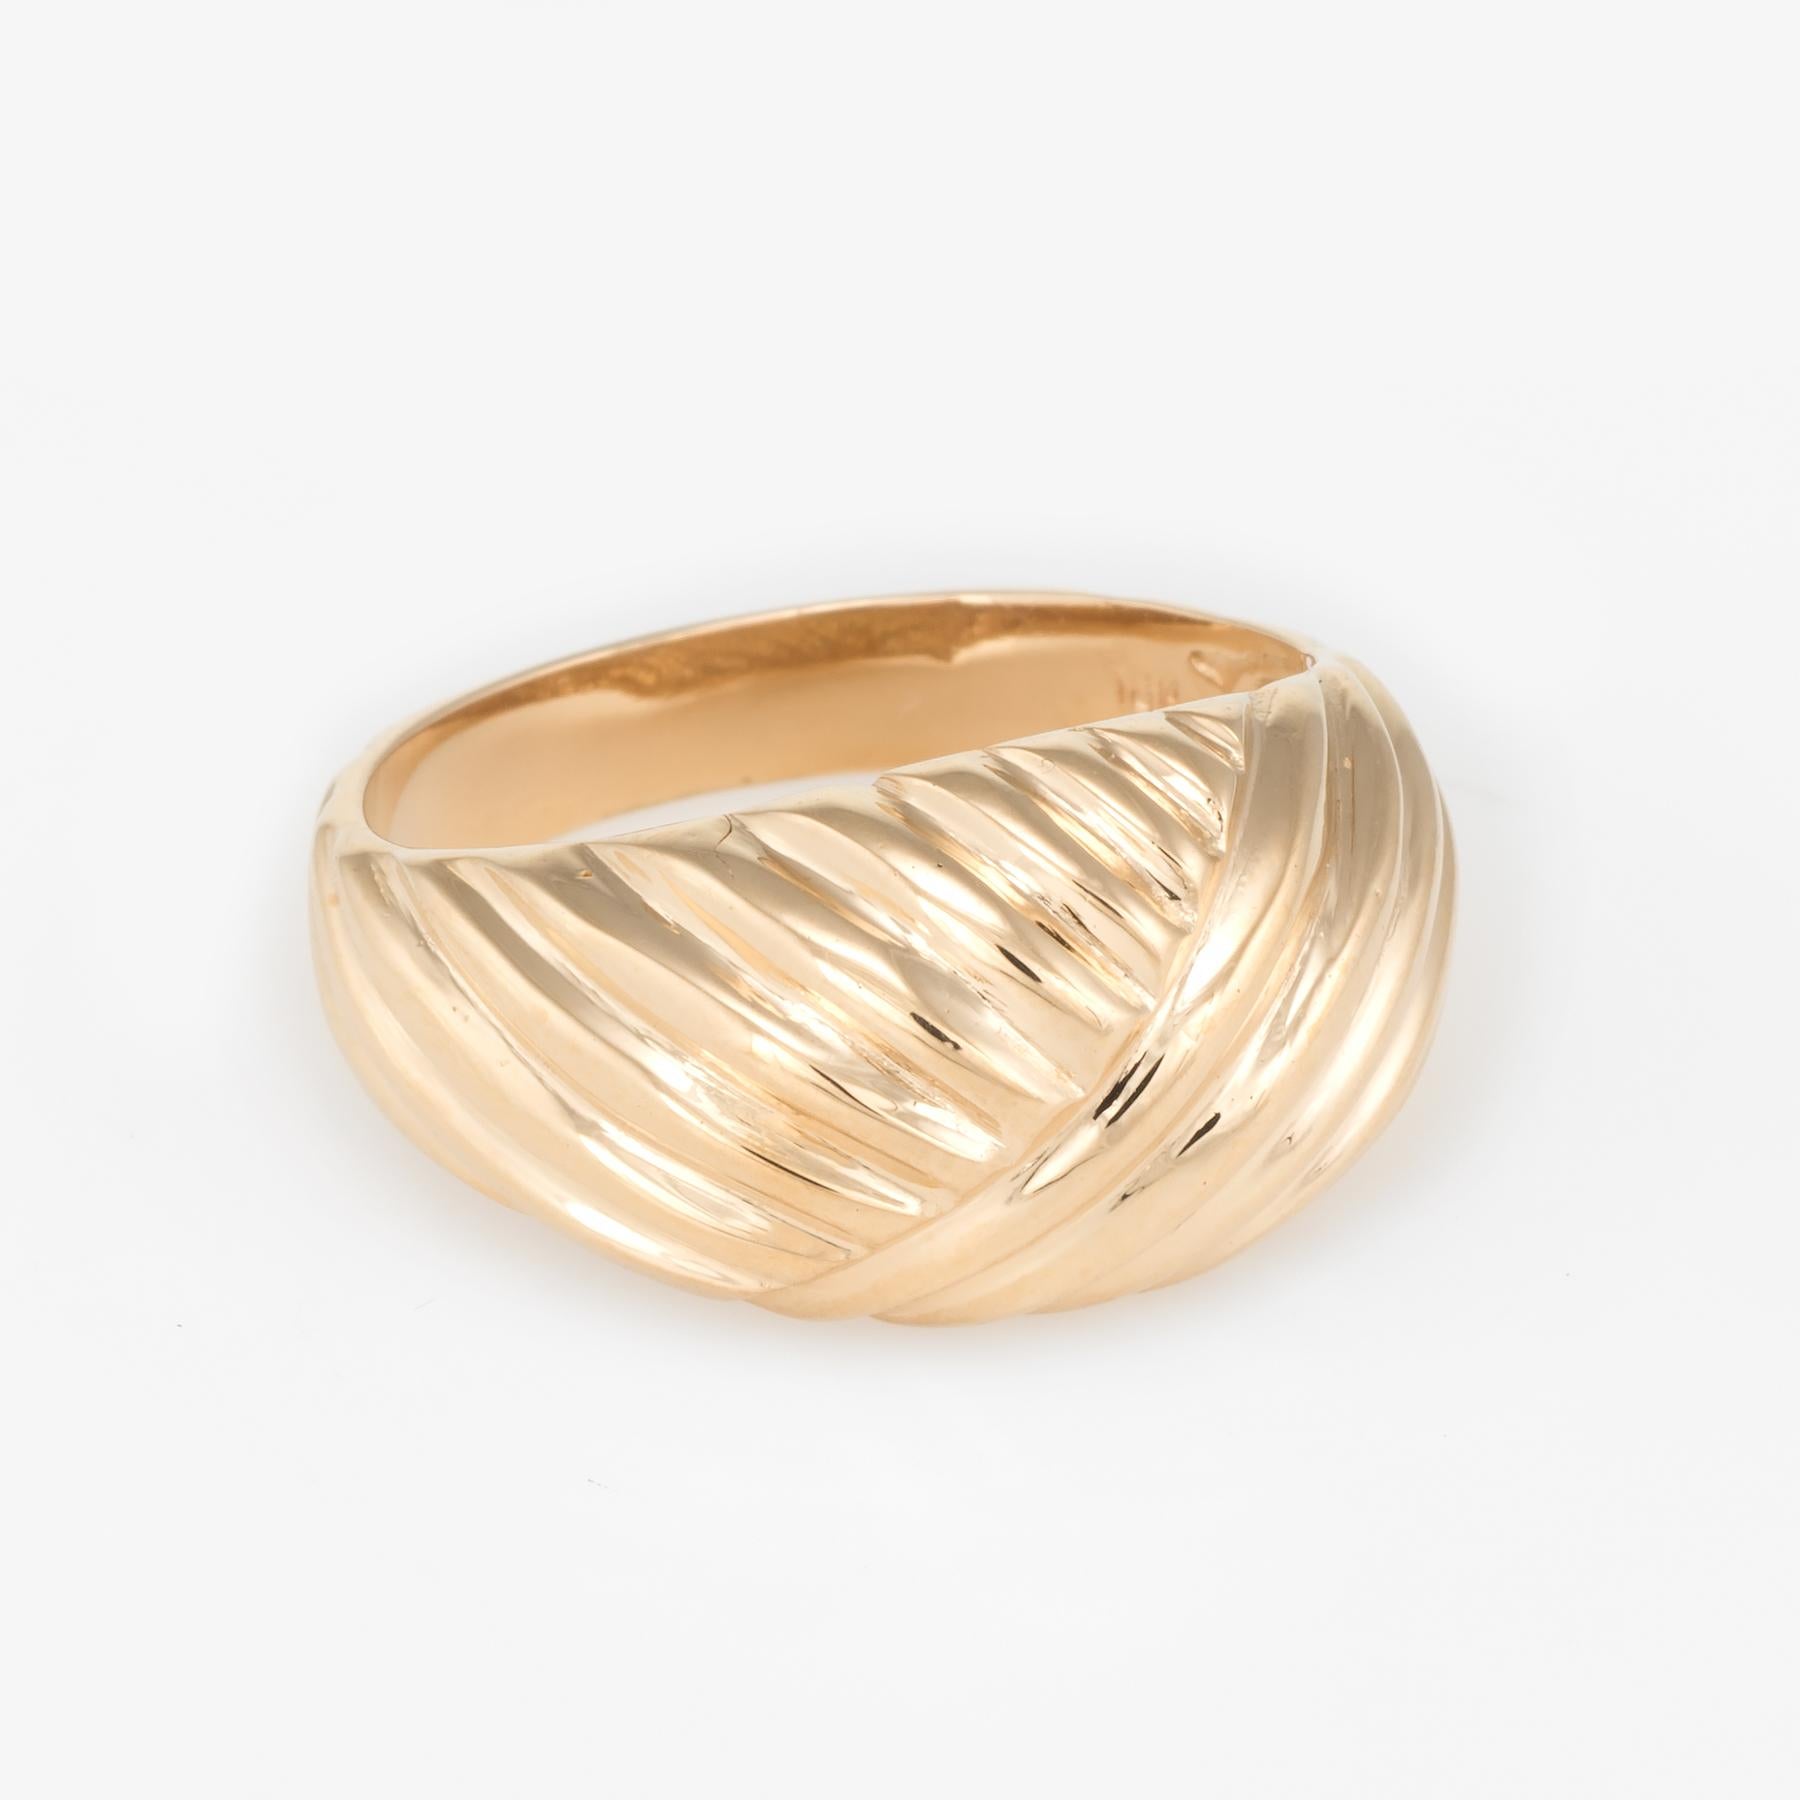 Elegant estate cocktail ring, crafted in 18 karat yellow gold. 

Finely detailed textured medium rise domed mount.   

The ring is in excellent condition. 

Particulars:

Weight: 3.6 grams

Stones:  N/A.

Size & Measurements: The ring is a size 6